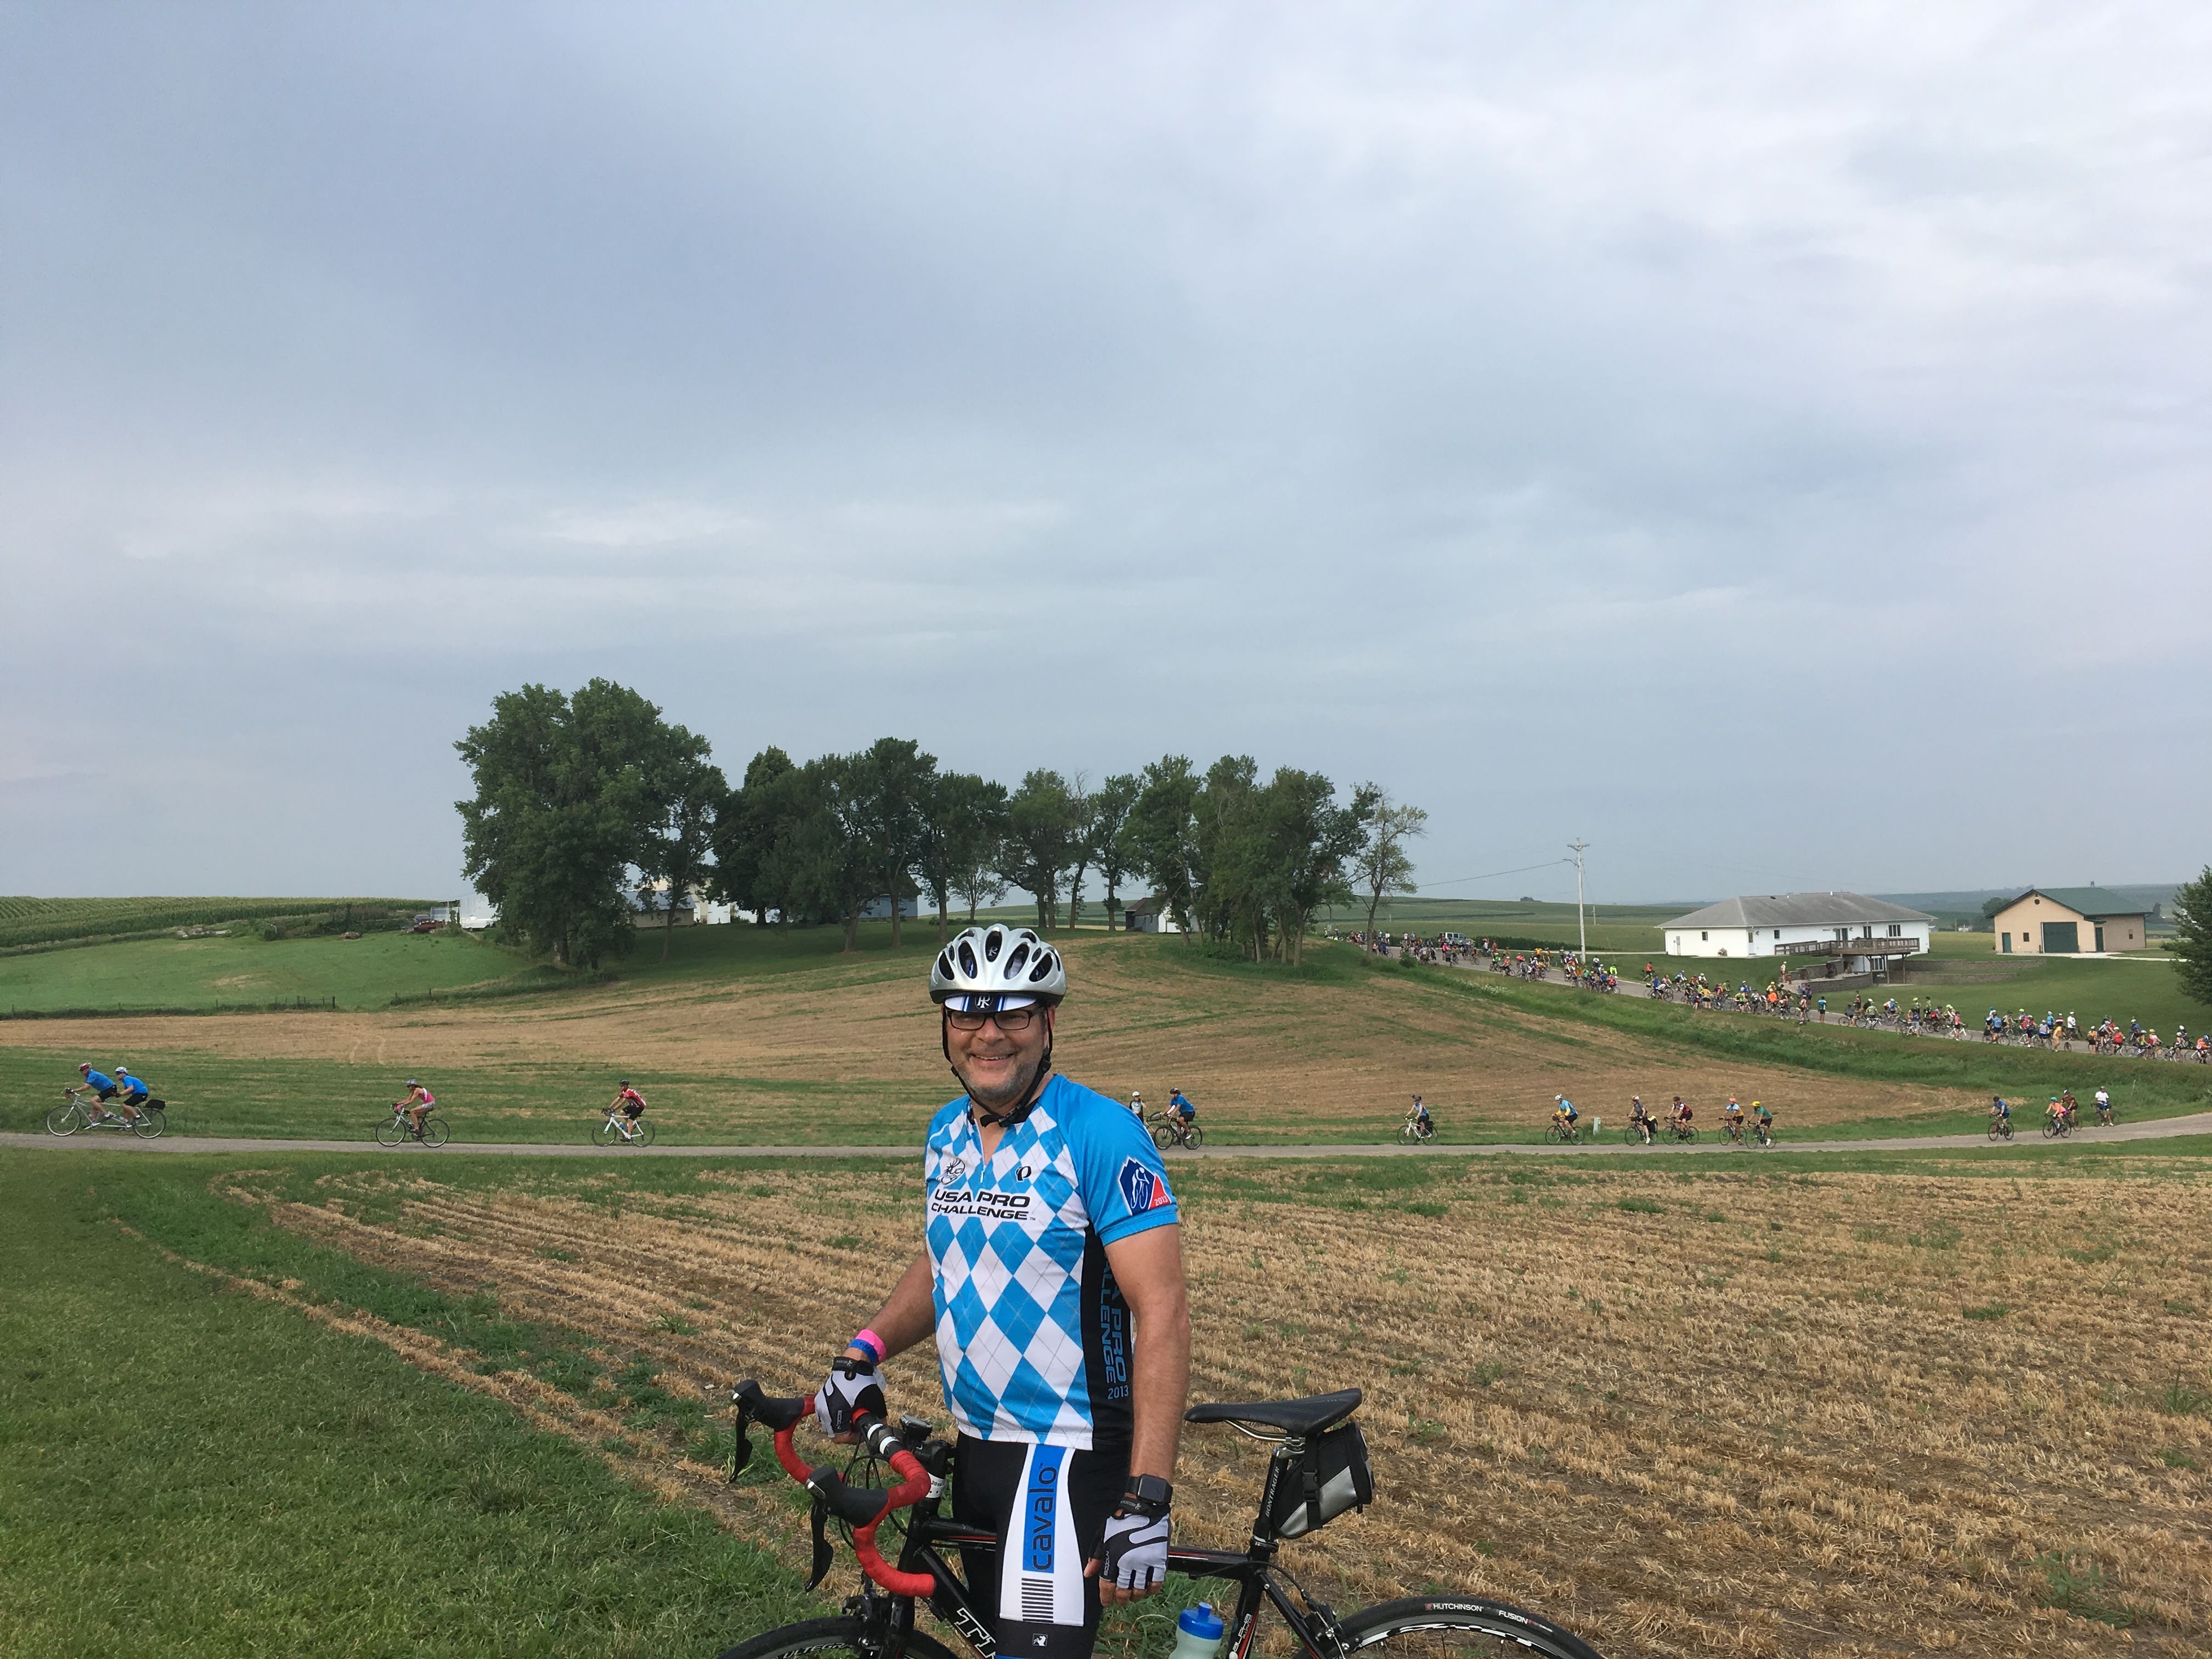 Adam Hutchinson is centered in the picture, showing fields behind him and bicycle riders in the distance.